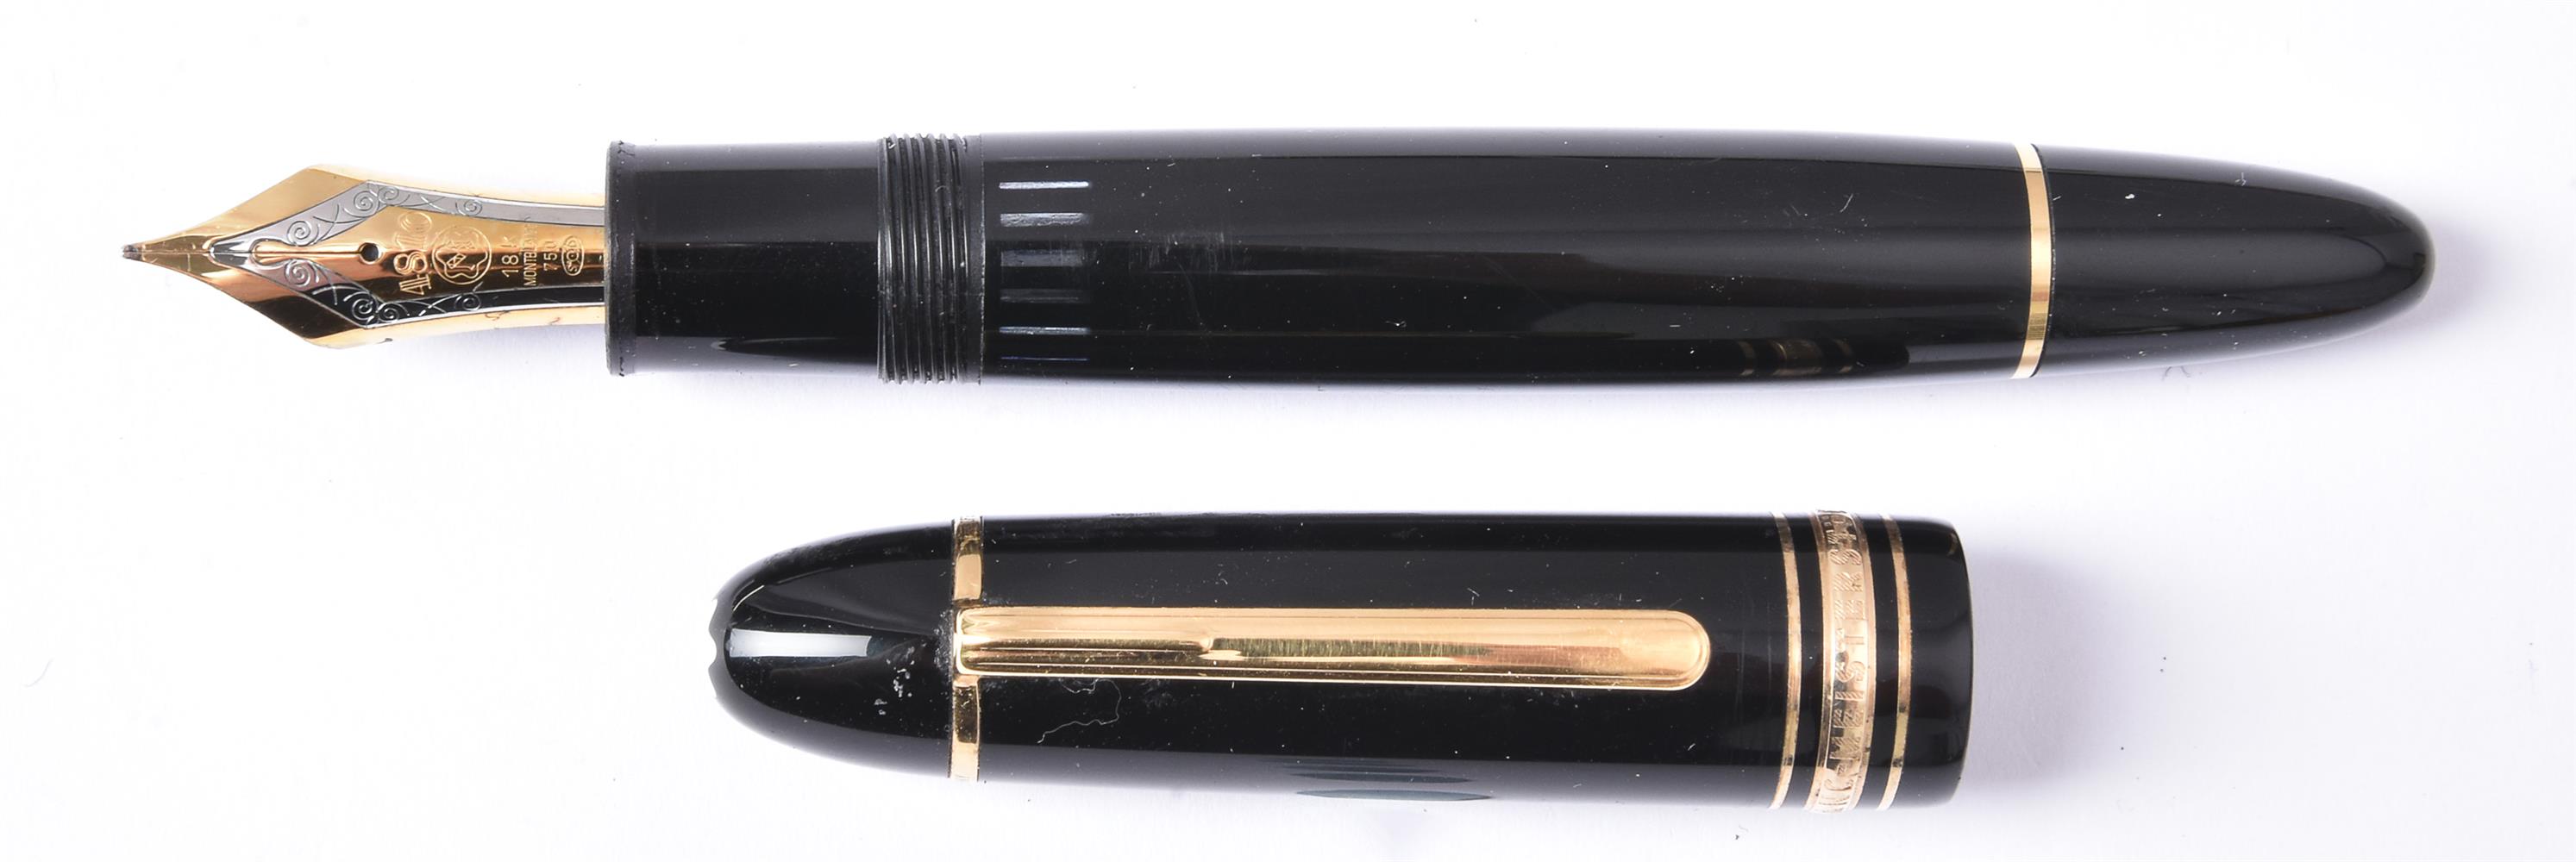 Montblanc, 149 UNICEF Edition by Helmut Jahn, a black fountain pen - Image 4 of 5